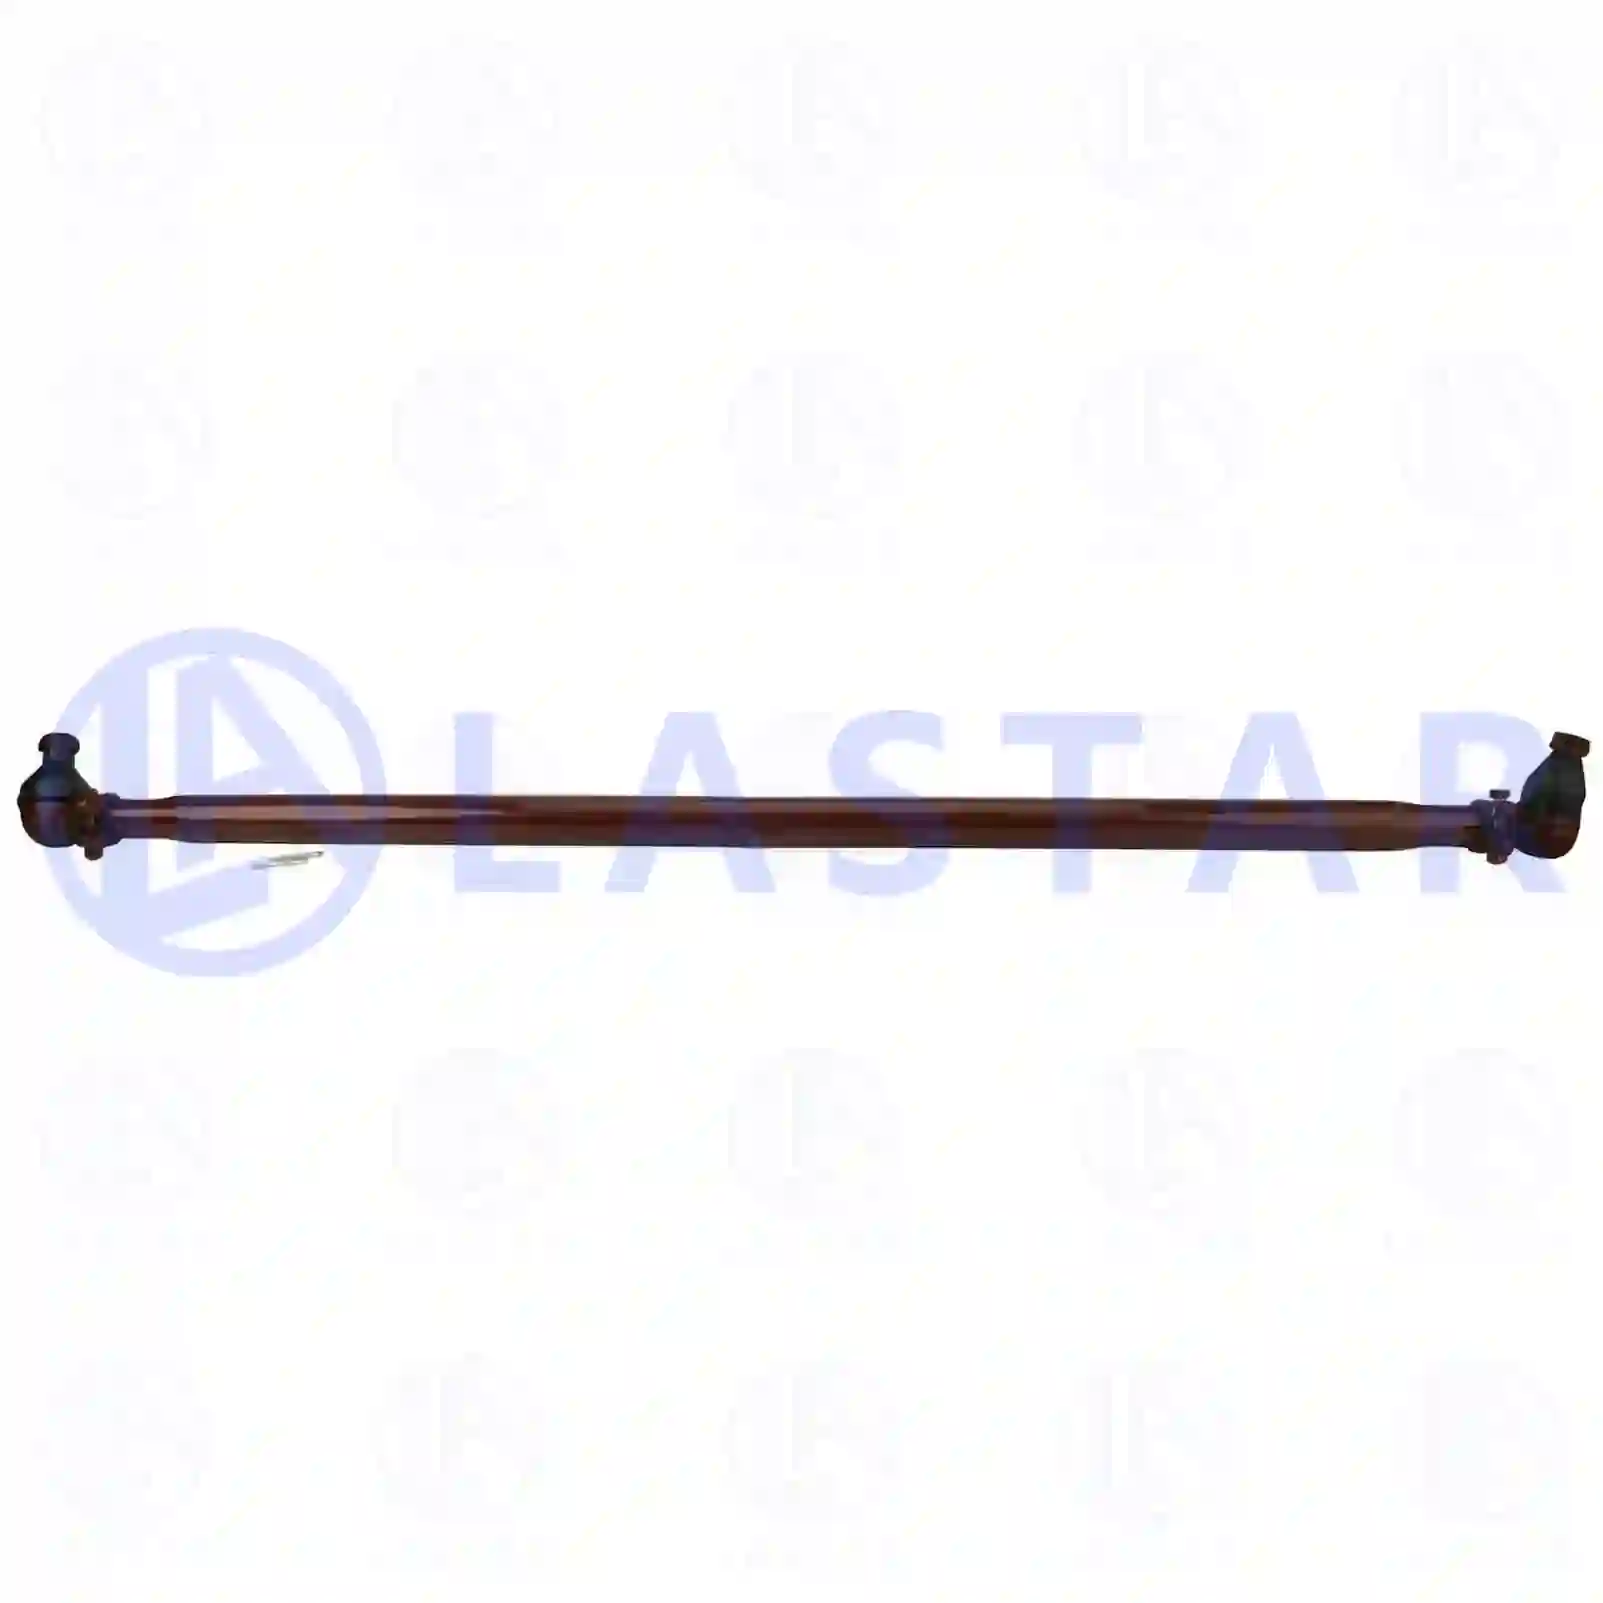 Track rod, 77730717, 3433300103, 3433300203, 3433300303, 3433300403 ||  77730717 Lastar Spare Part | Truck Spare Parts, Auotomotive Spare Parts Track rod, 77730717, 3433300103, 3433300203, 3433300303, 3433300403 ||  77730717 Lastar Spare Part | Truck Spare Parts, Auotomotive Spare Parts